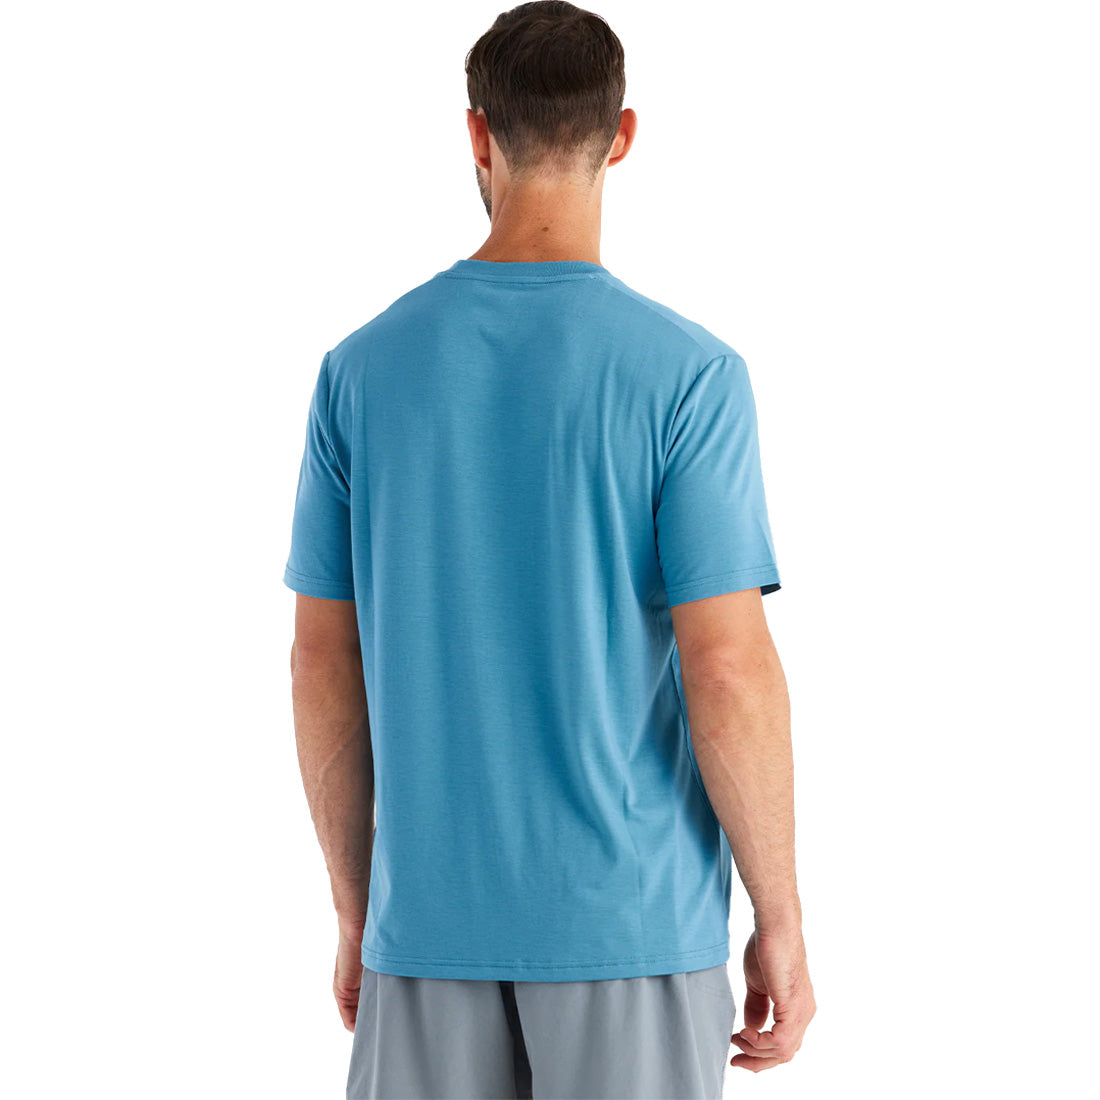 Free Fly Bamboo Motion Tee - Men's